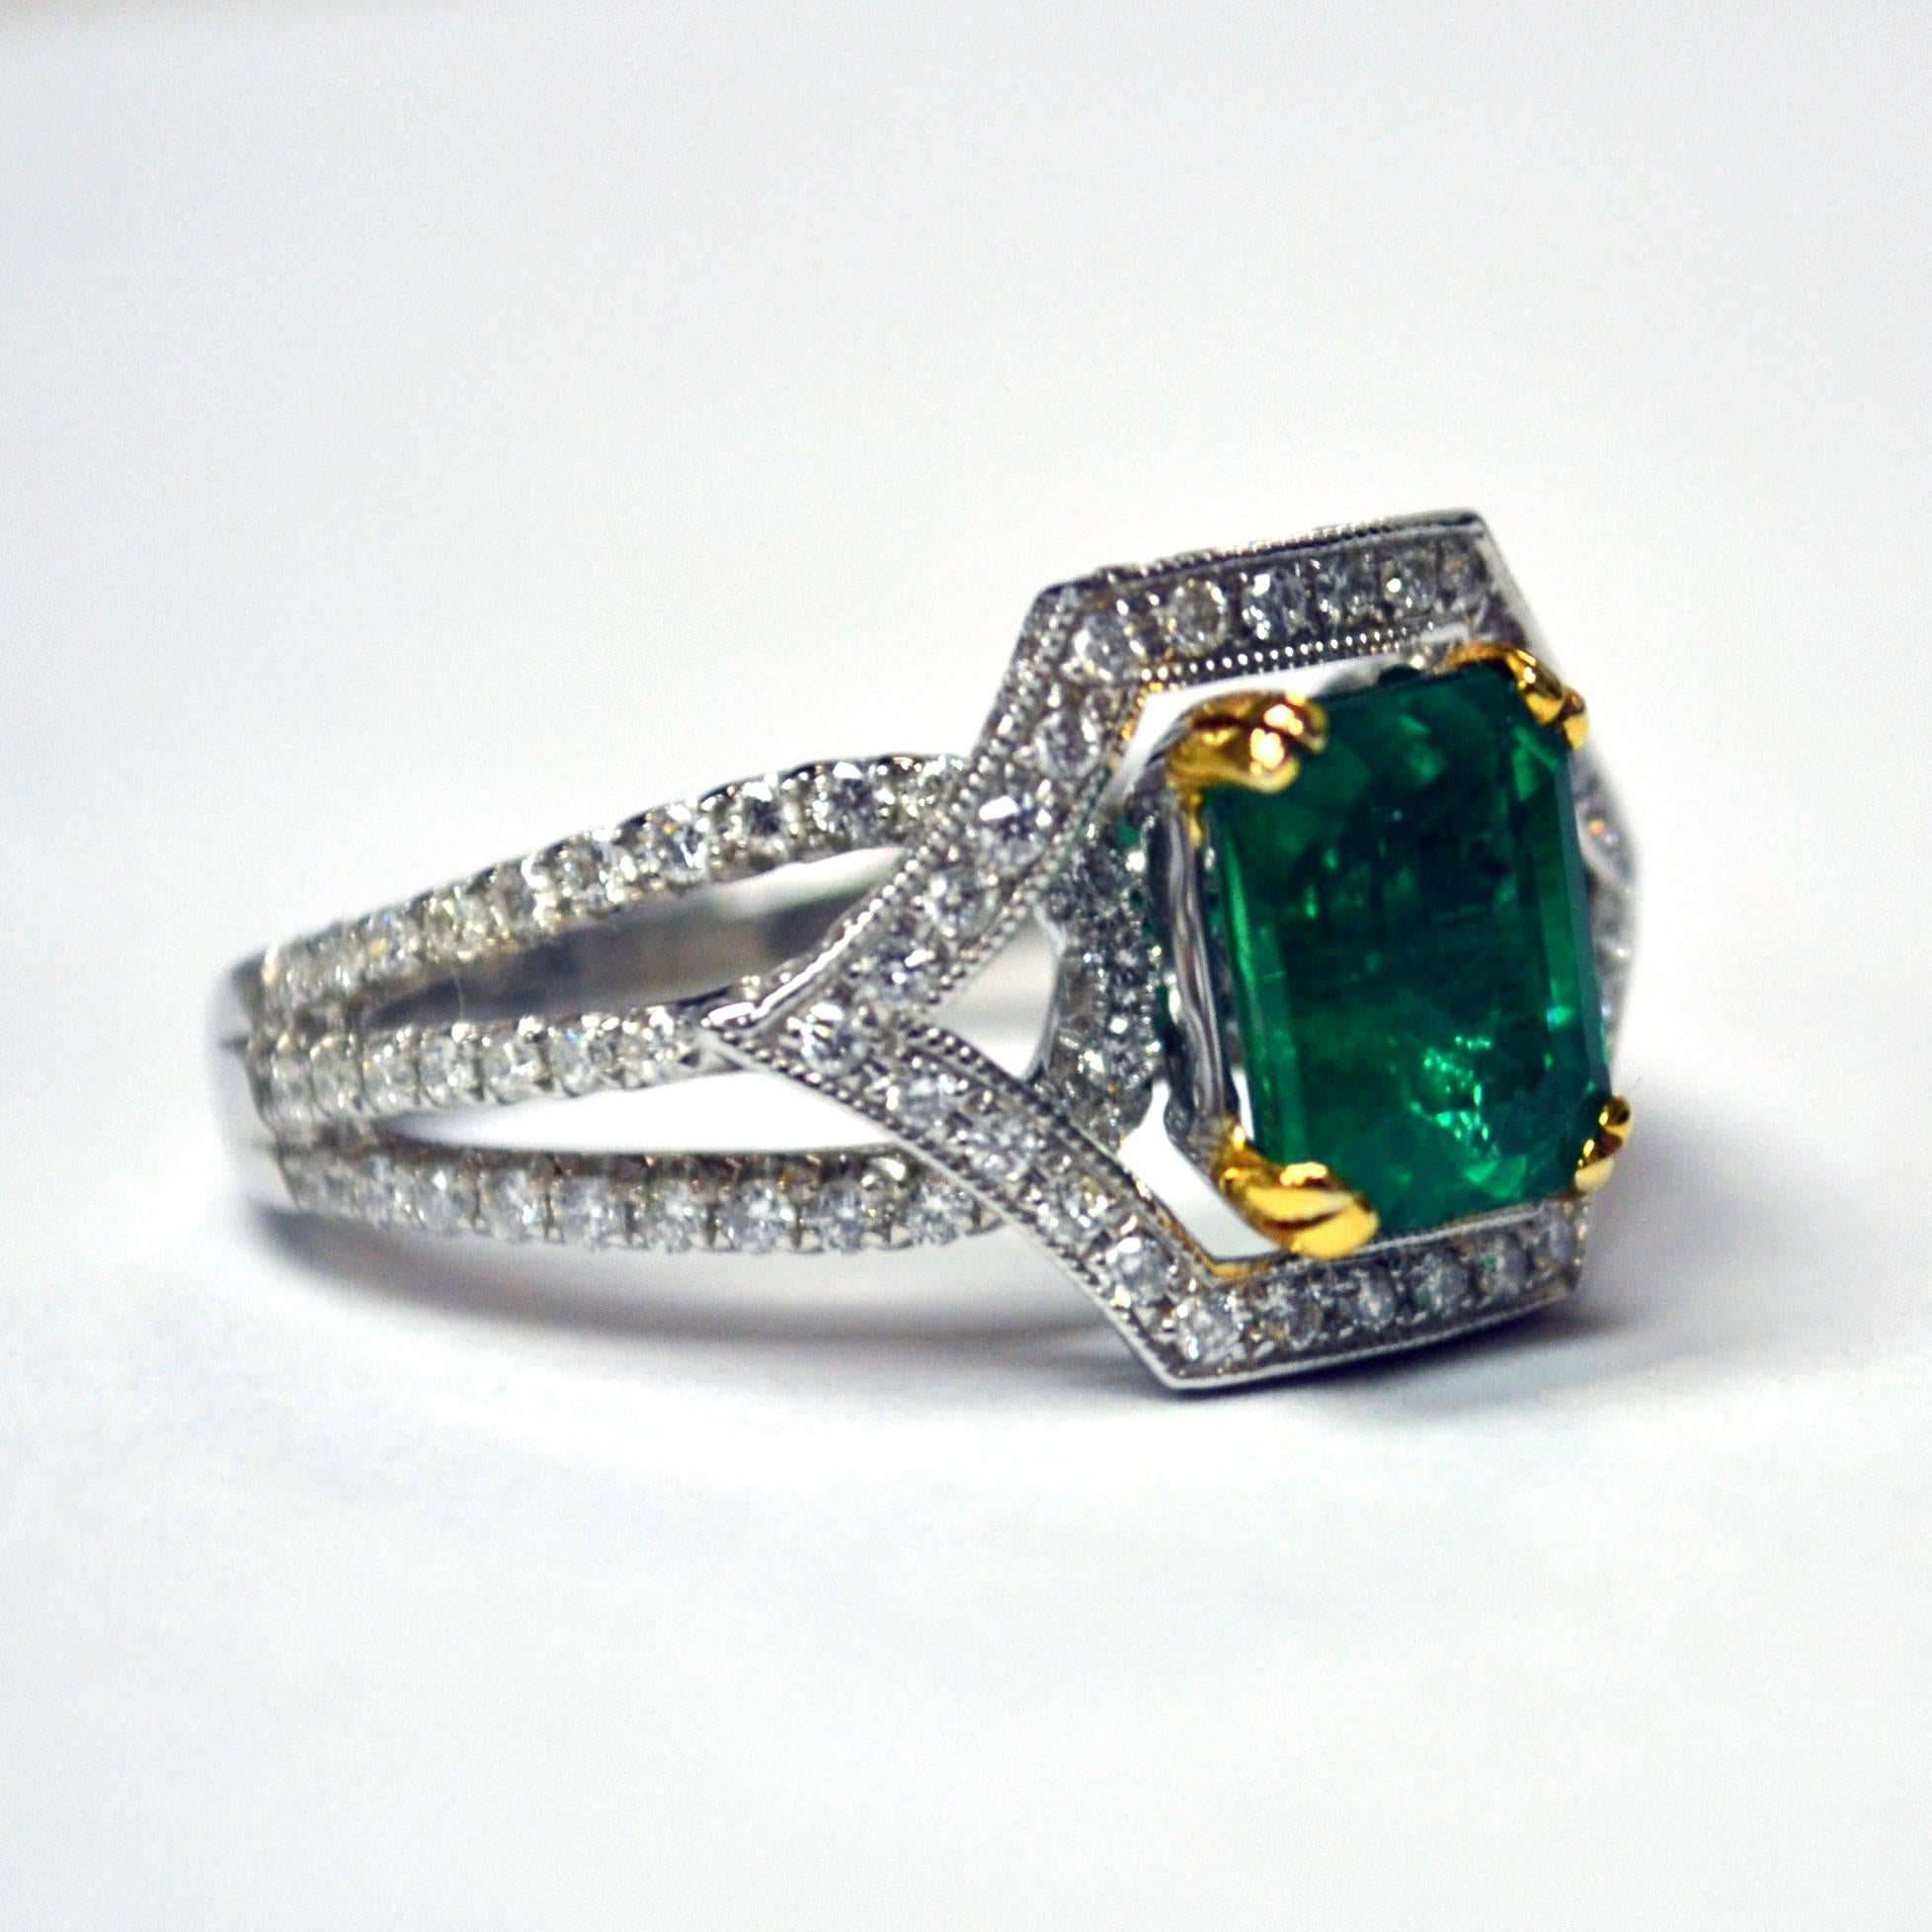 Solitaire Ring in 18K white gold set with an emerald cut Zambian Emerald (1.78 carat) and 128 round brilliant-cut Diamonds (0.78 carat) 

Ring US Size 6.5
*Complimentary resizing service* 